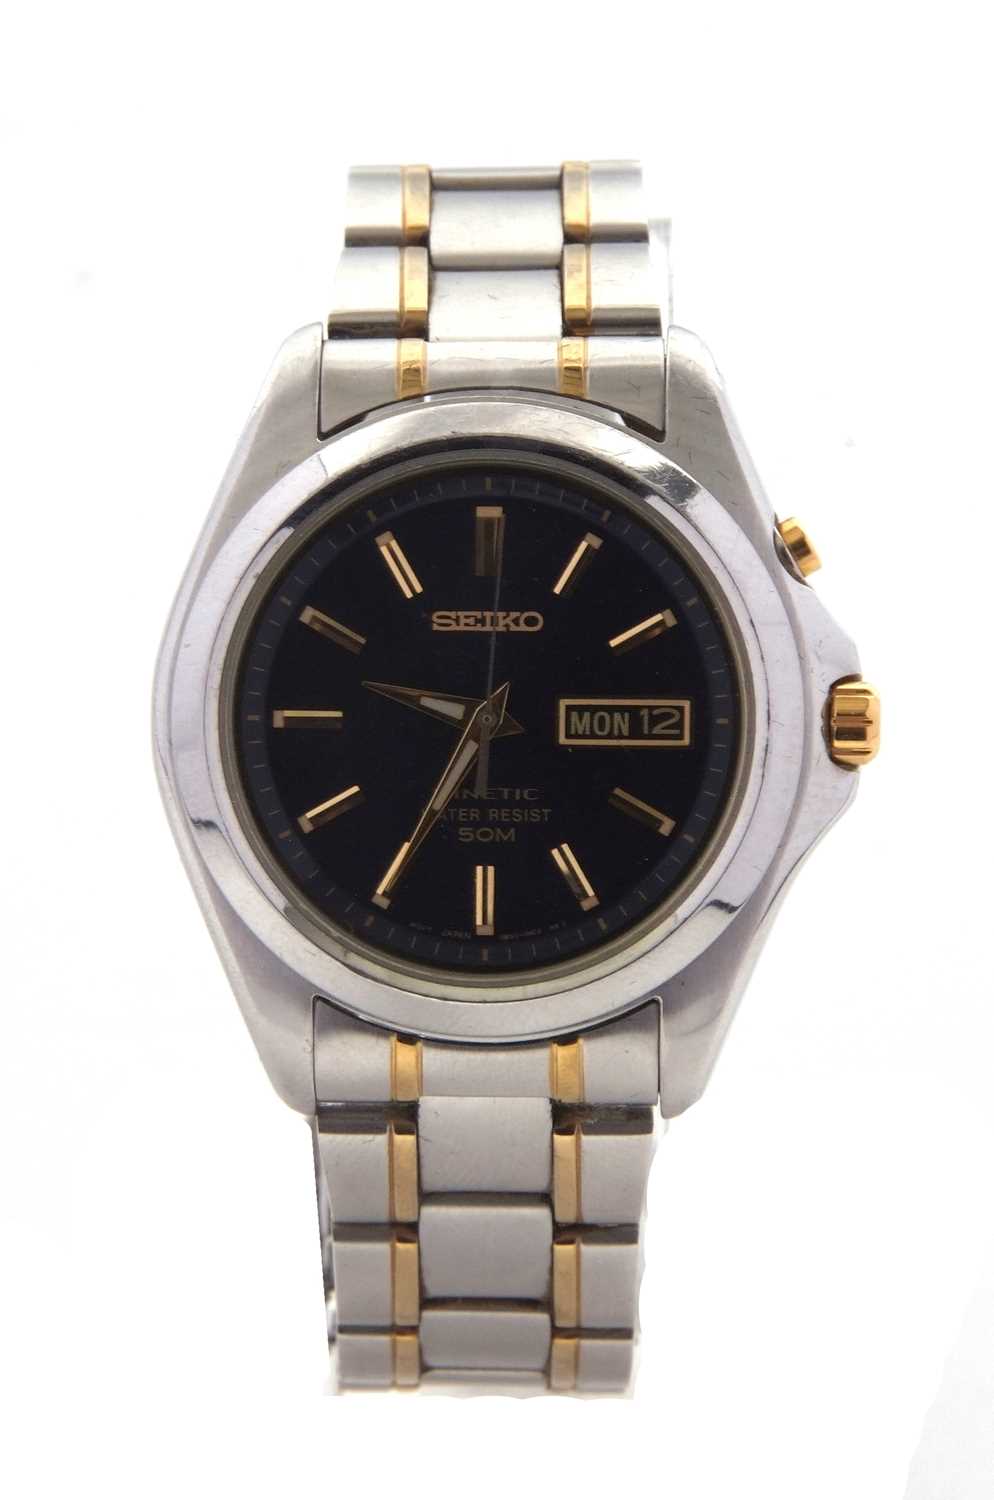 A Seiko Kinetic automatic gents wristwatch, the watch has a kinetic movement, blue dial with gold